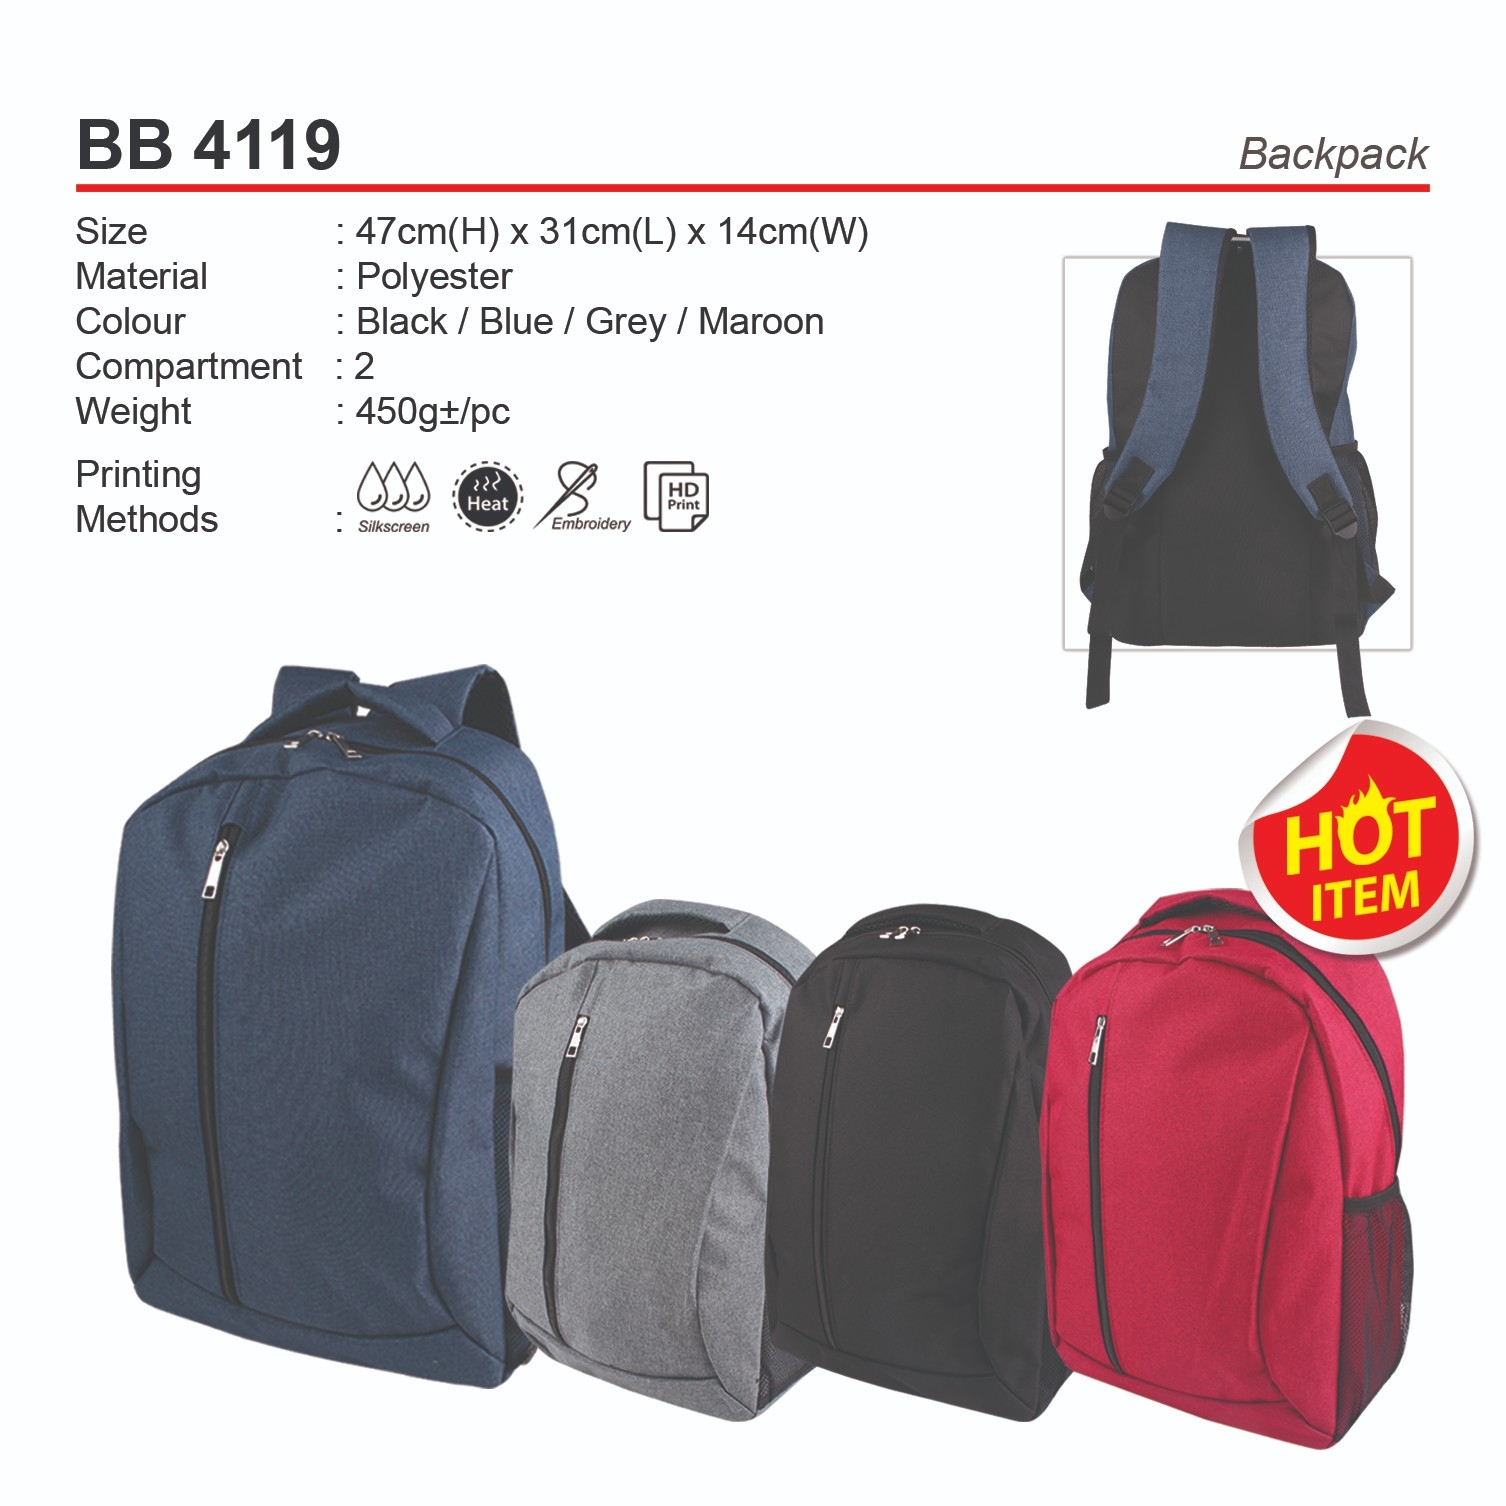 BB4119 Backpack (A)